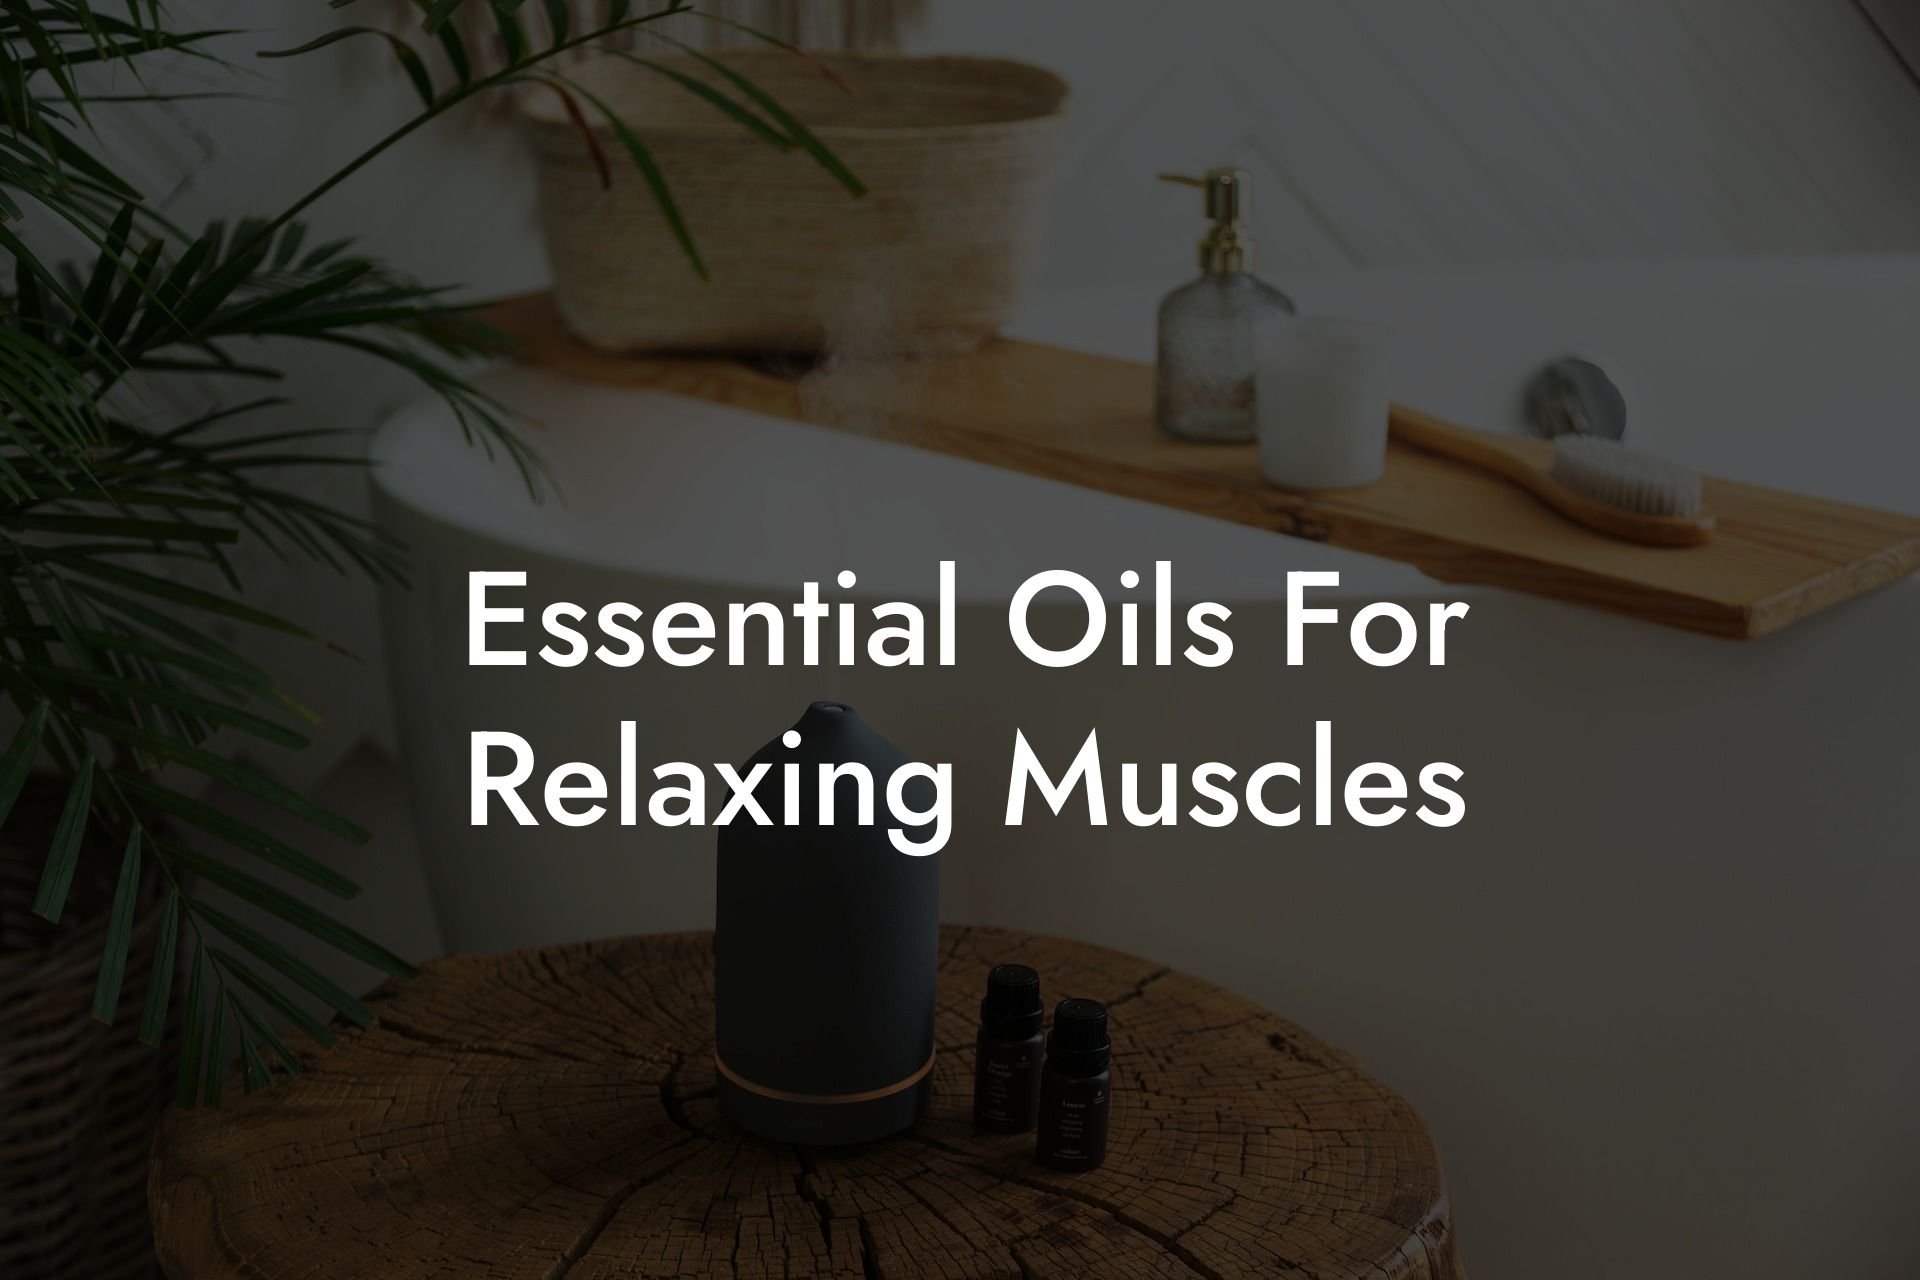 Essential Oils For Relaxing Muscles